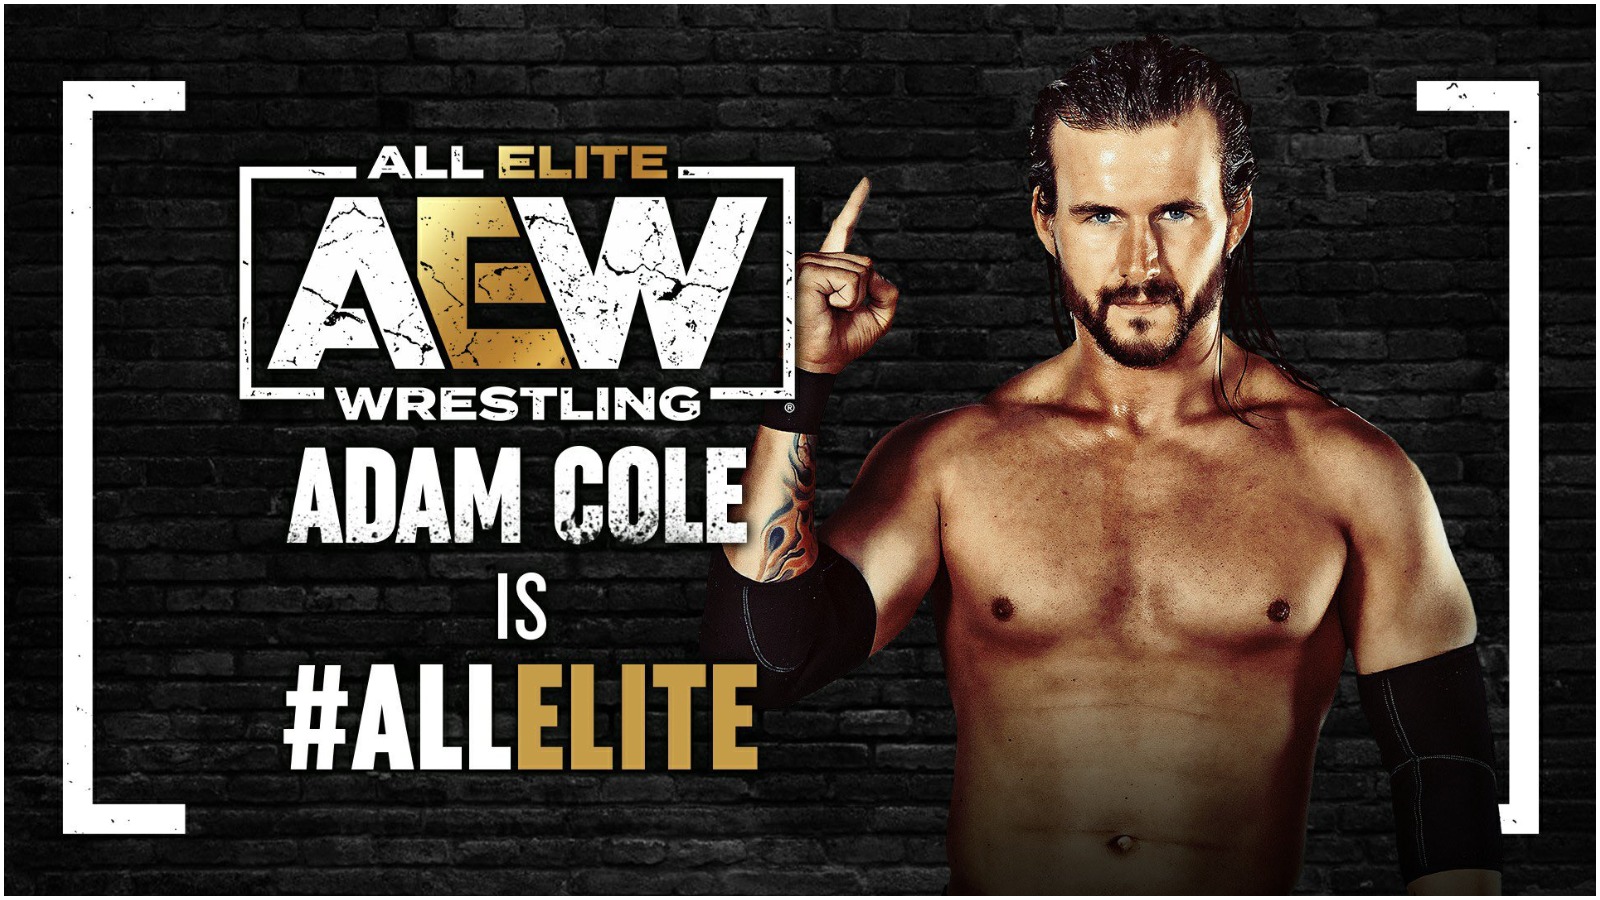 Why did Adam Cole leave WWE and decide to join AEW?